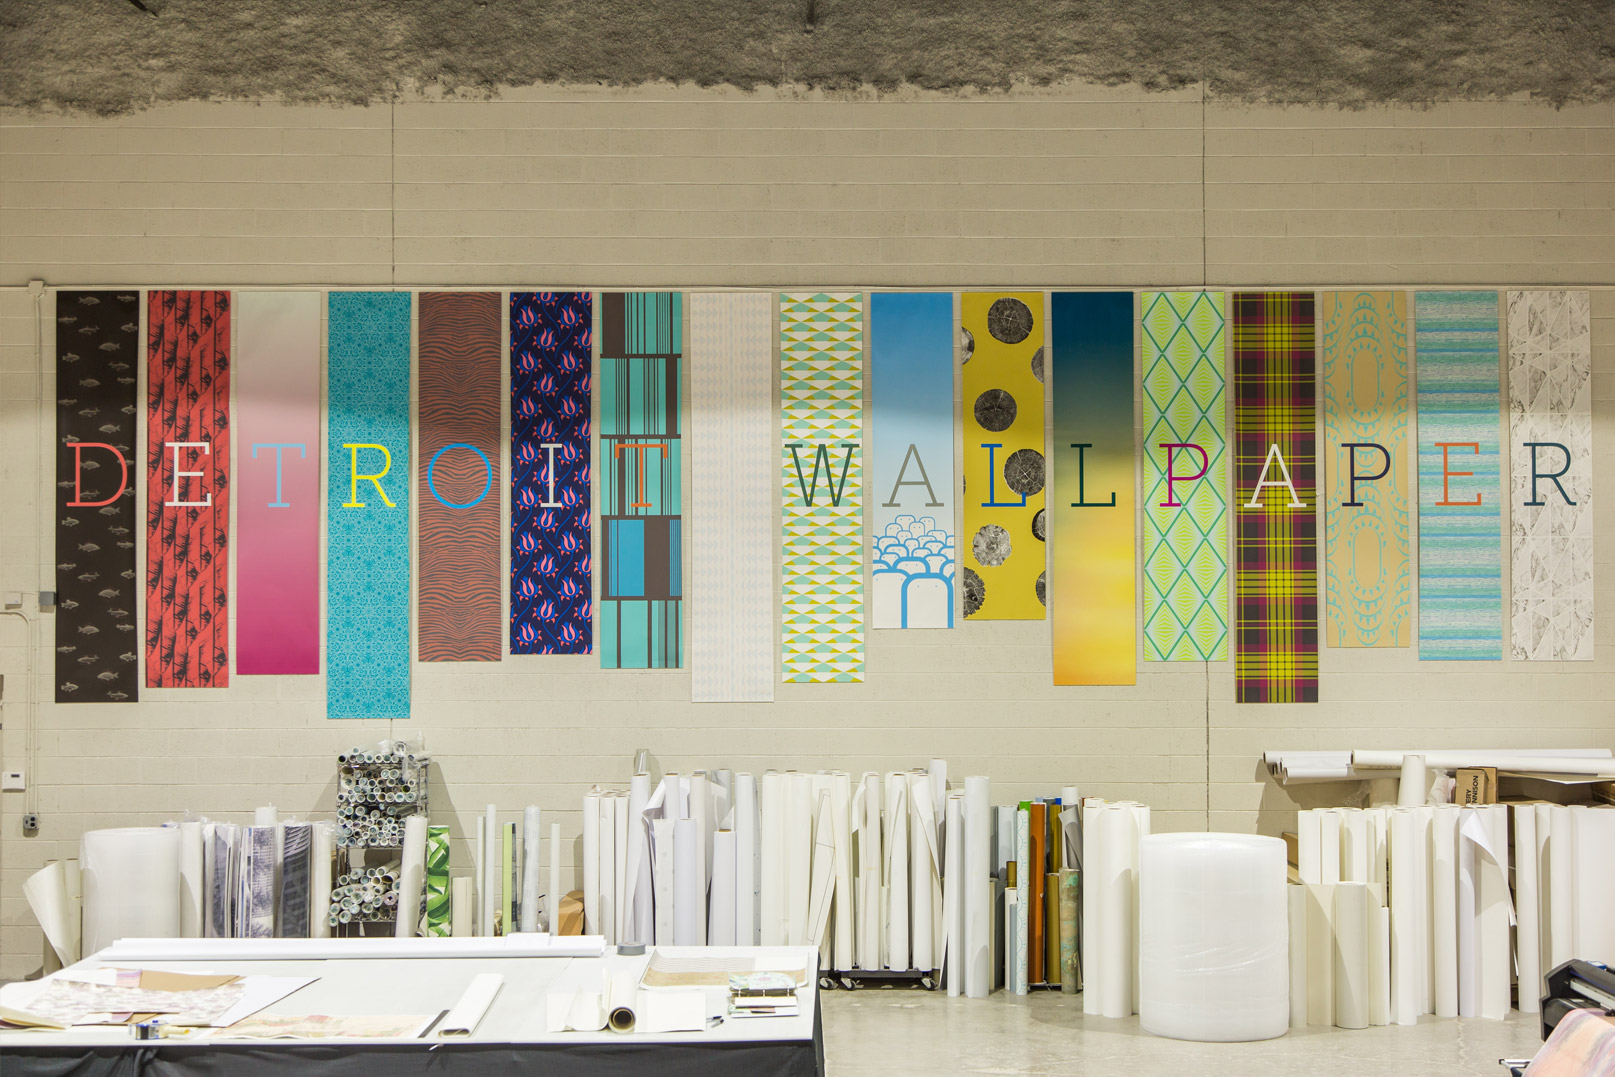 Photo showing panels of wallpaper spelling out Detroit Wallpaper.